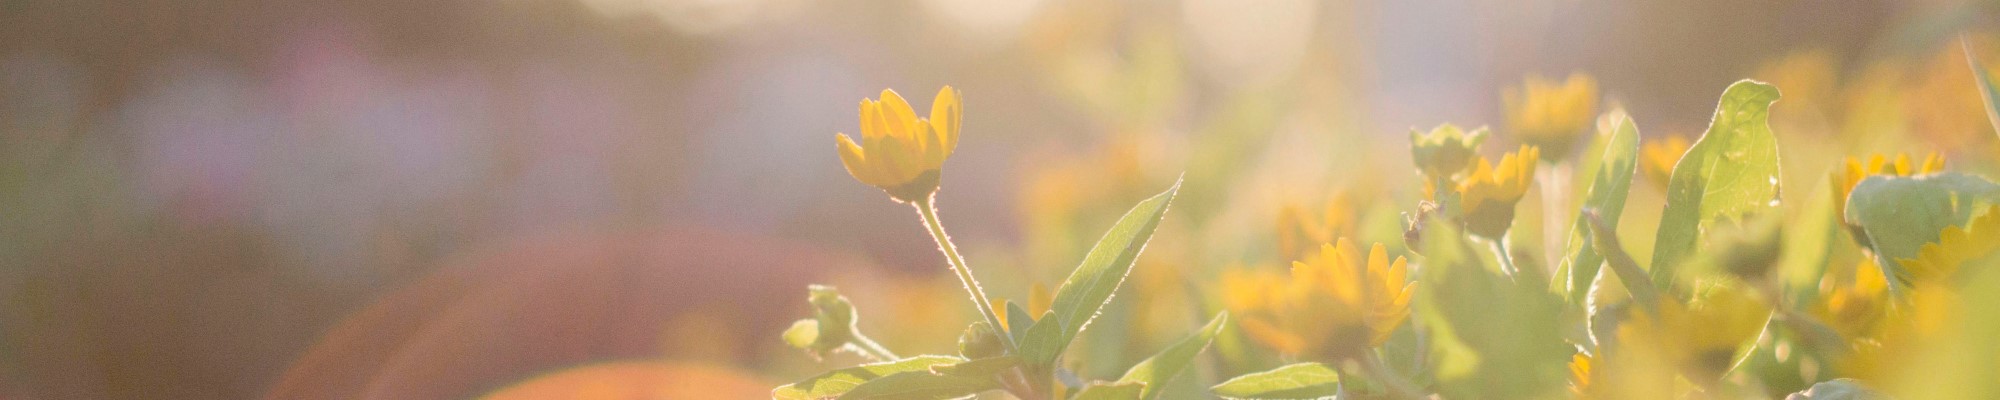 image of yellow flowers in sunlight